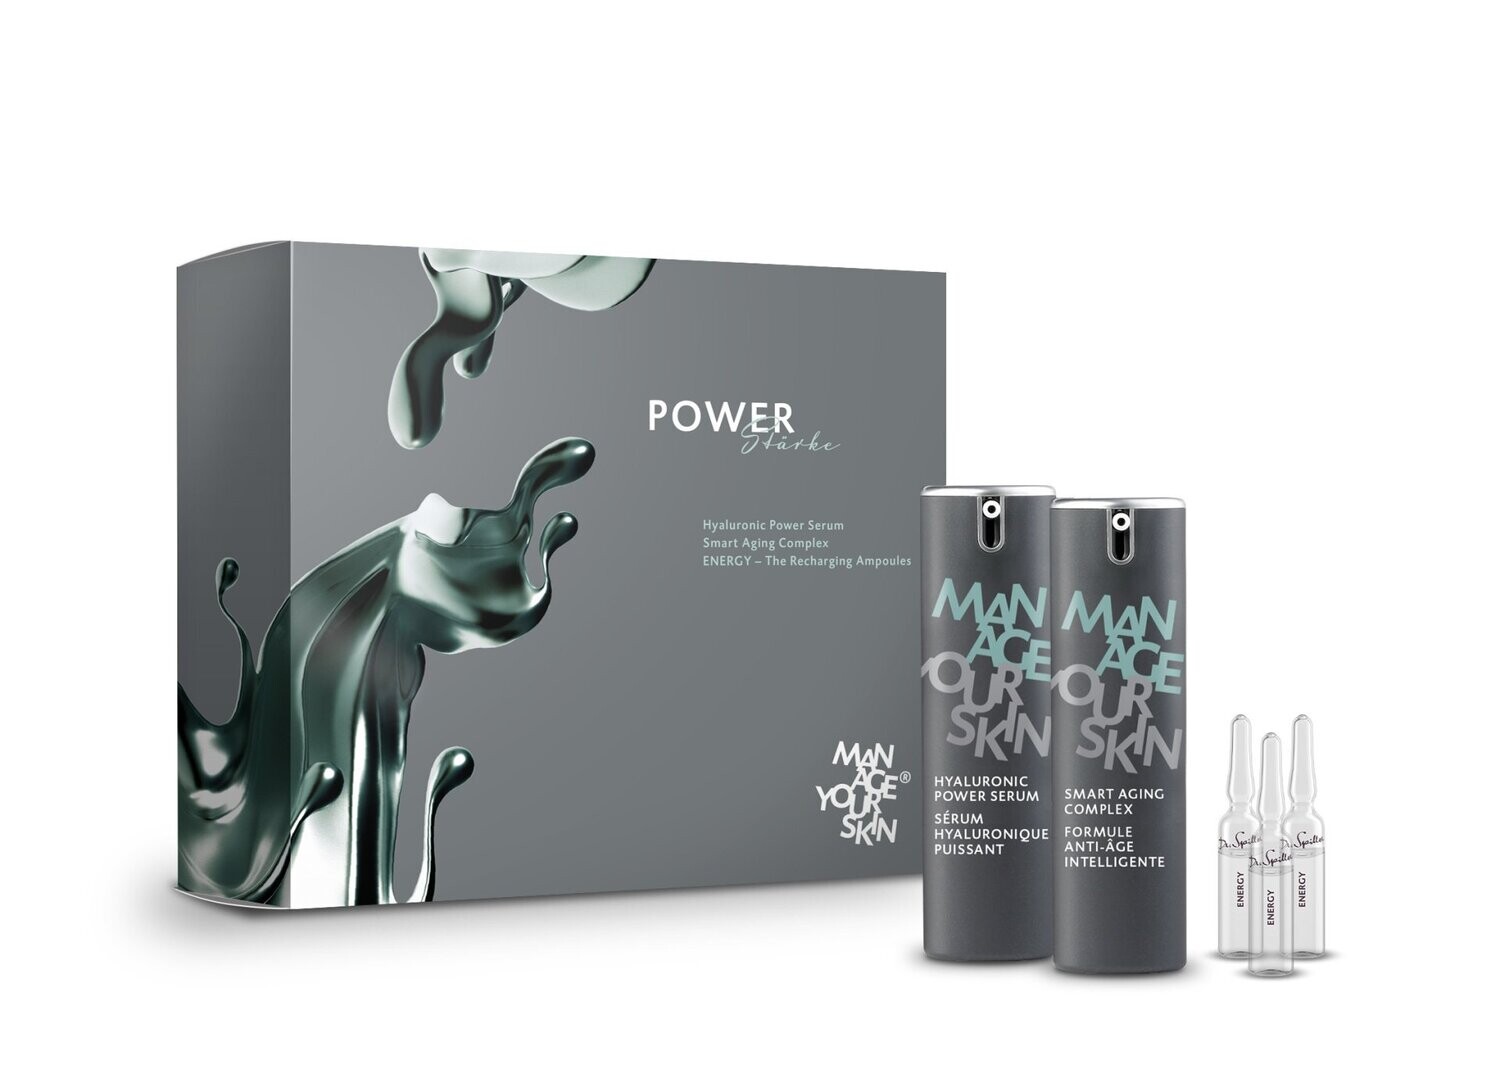 Manage Your Skin® "POWER" Set